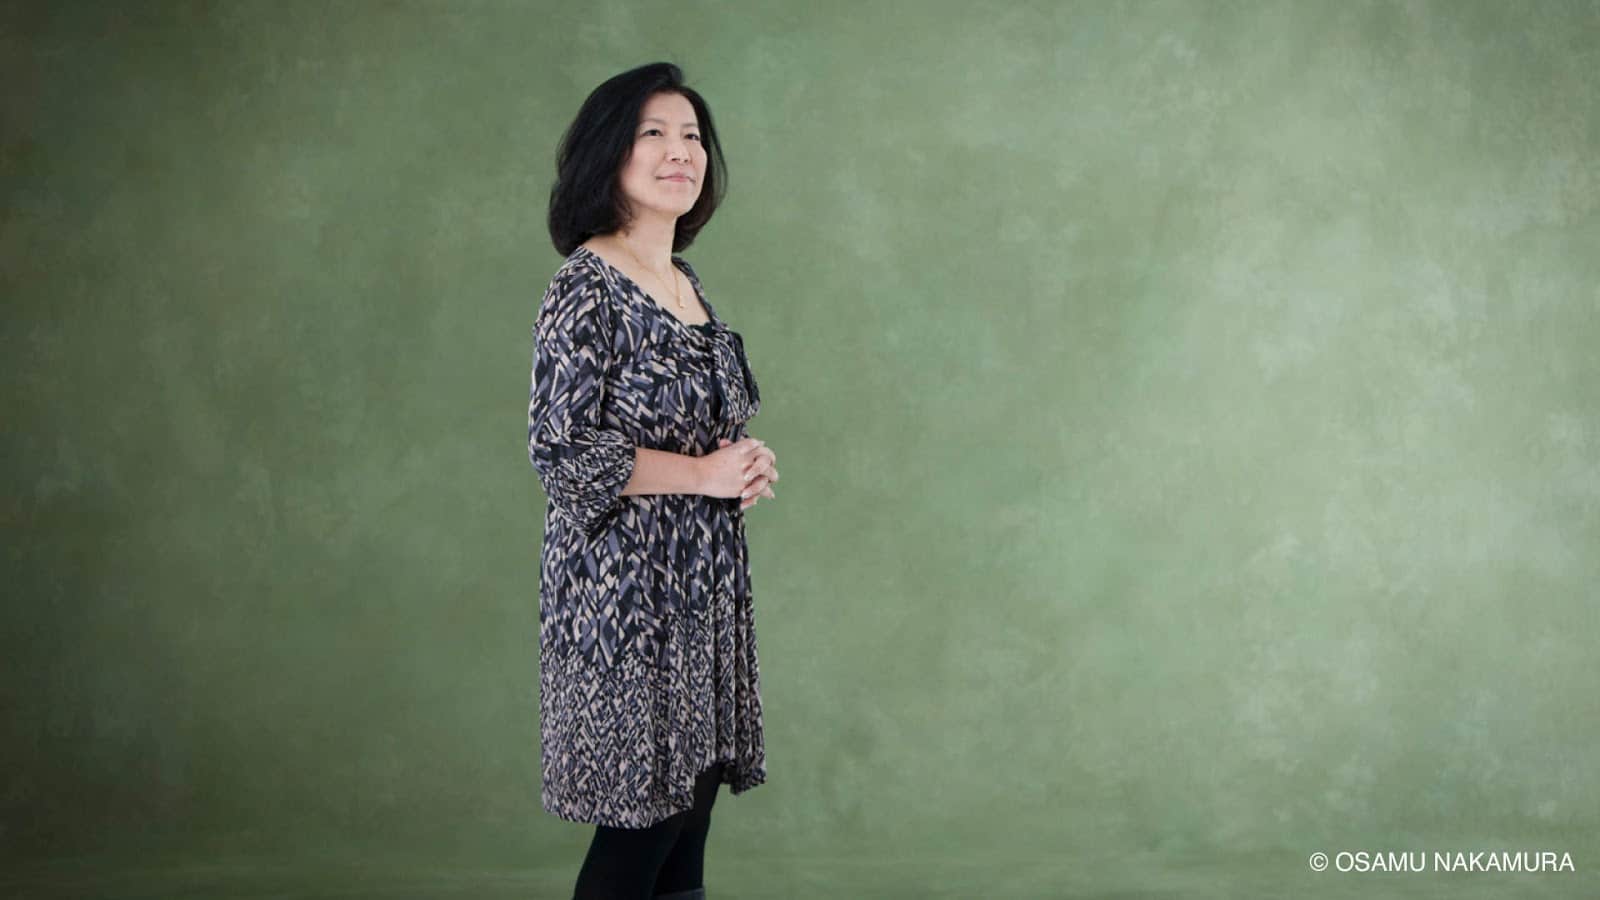 Kingdom Hearts Composer Yoko Shimomura Shares Insights on ‘Dearly Beloved’ and How She’s Evolved it Over the Last 18 Years